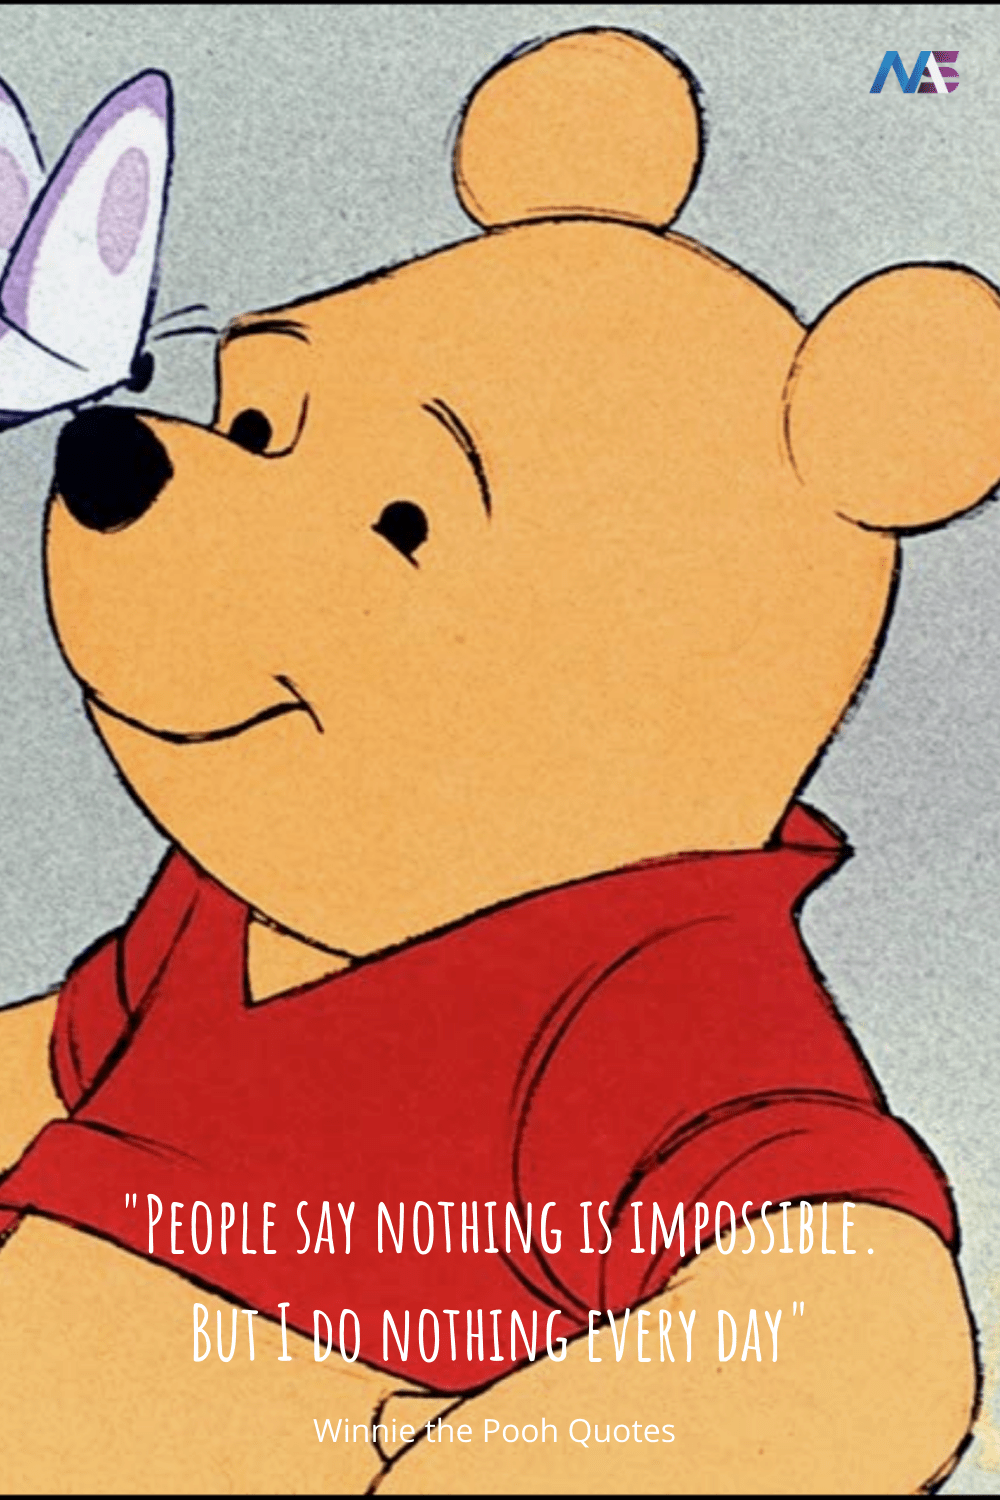 Winnie the pooh Quotes